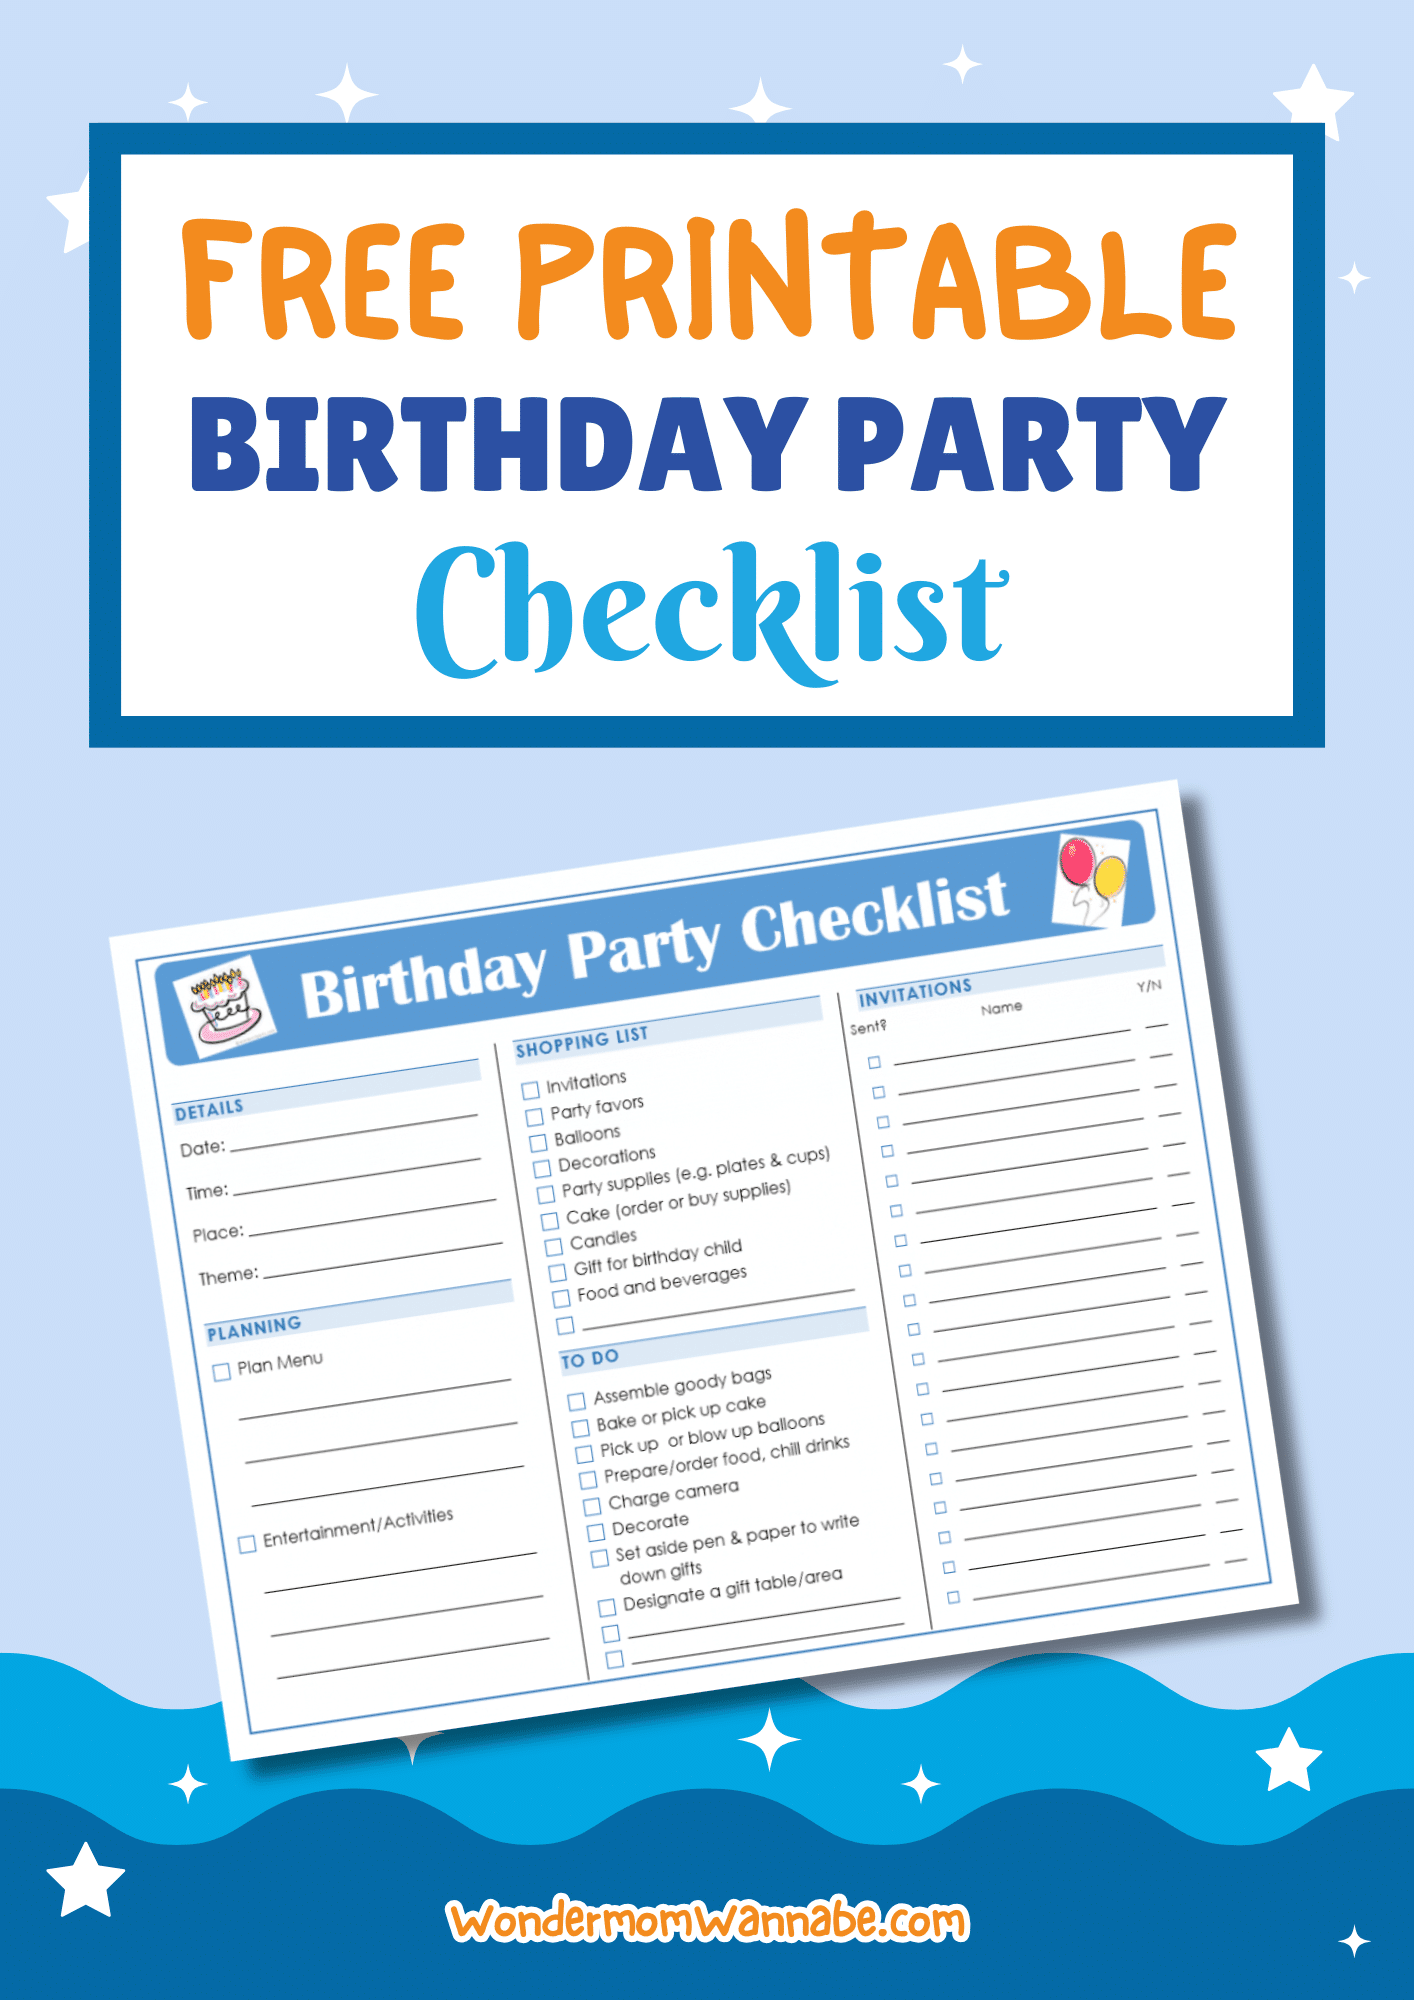 Get your hands on a birthday party checklist that is absolutely free and printable.